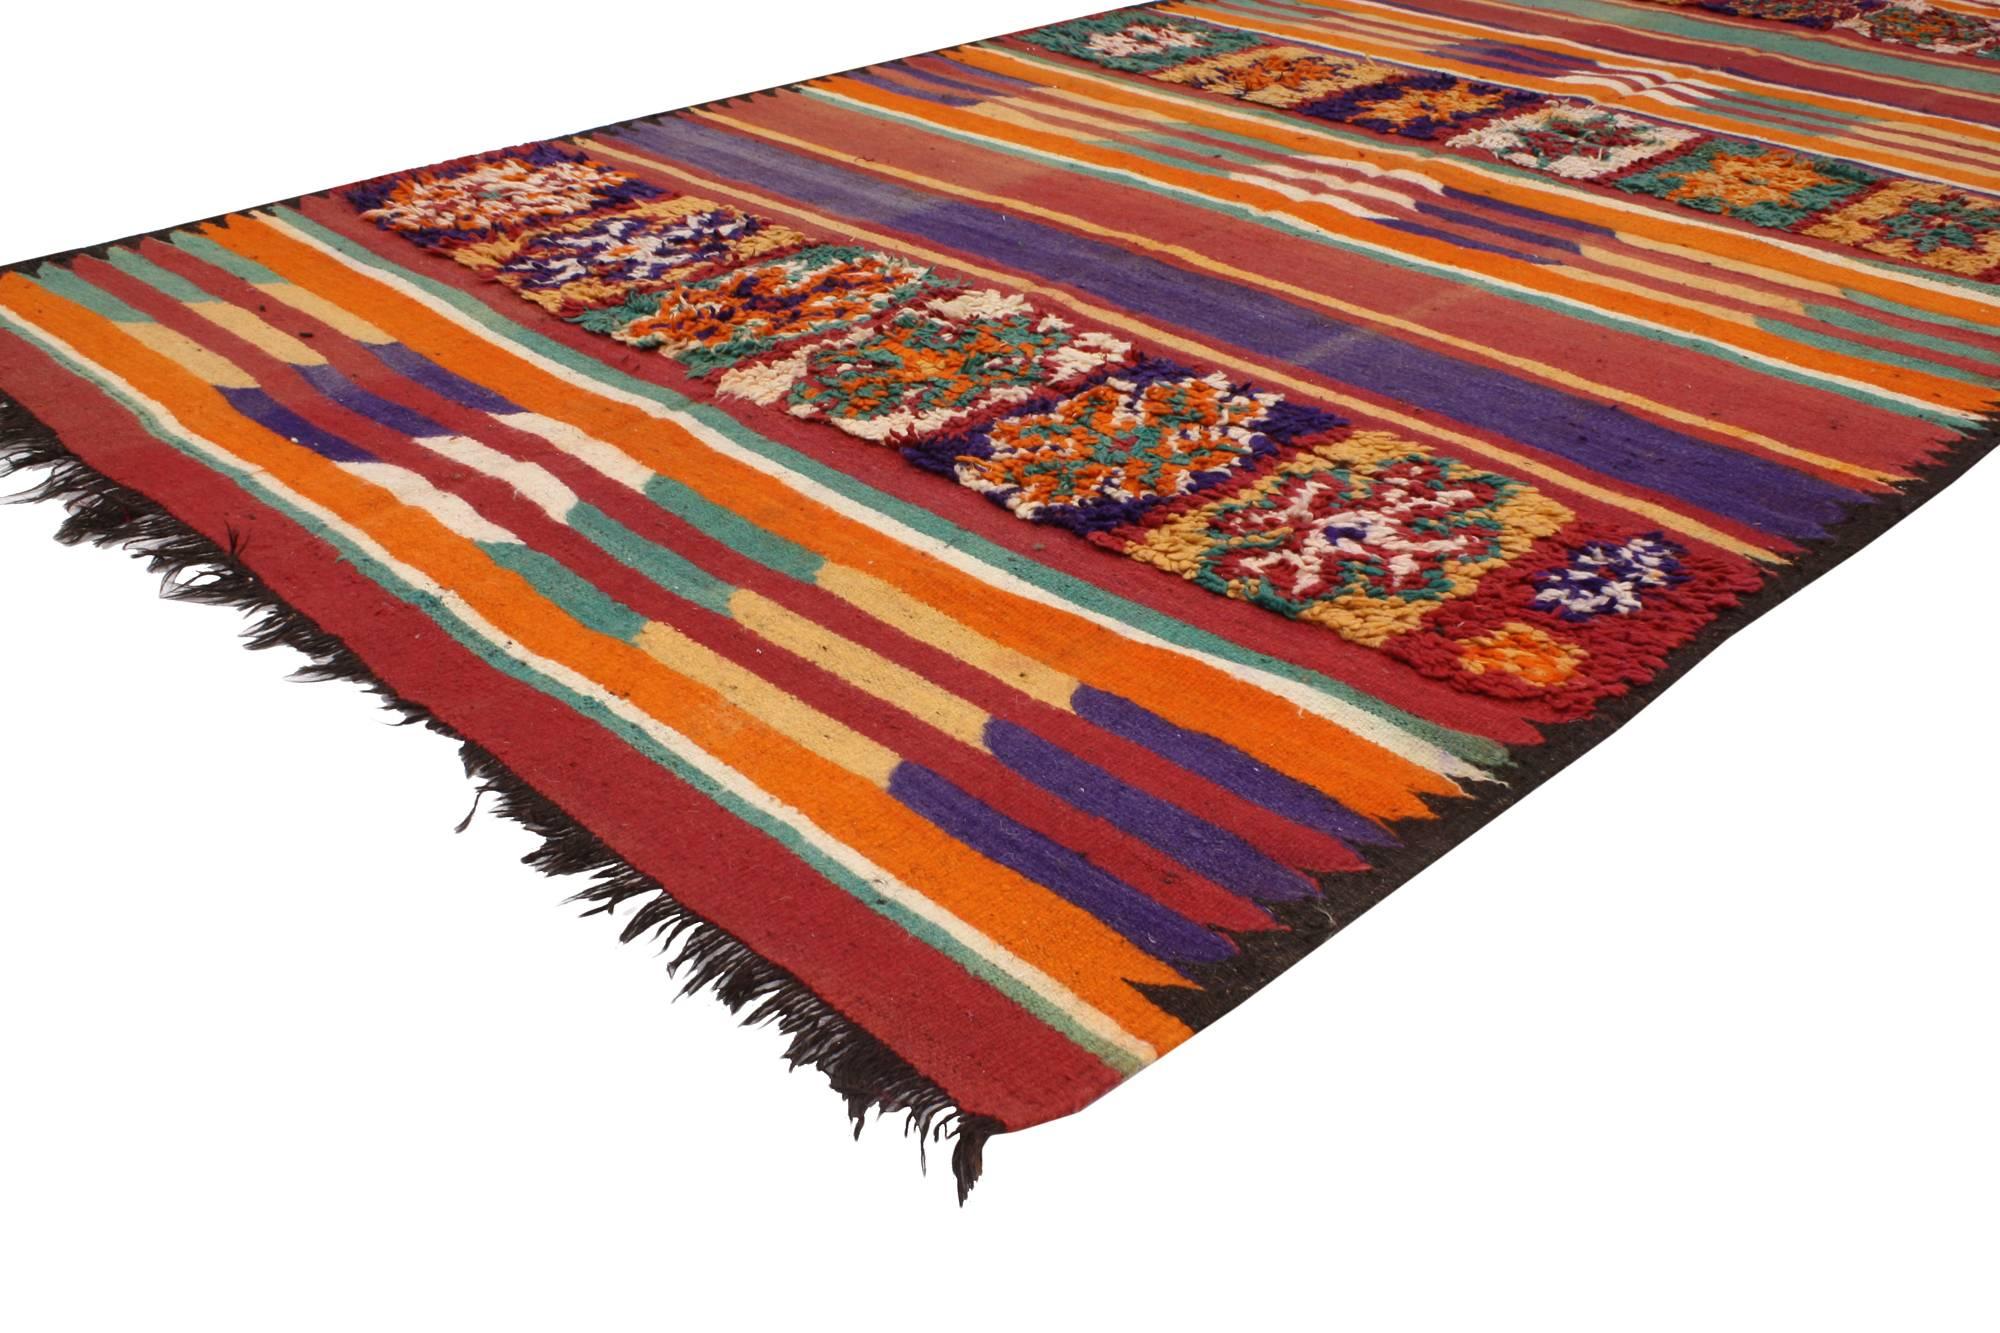 Hand-Woven Vintage Berber Moroccan Kilim Rug with Modern Cabin Style, Flat-weave Kilim Rug For Sale